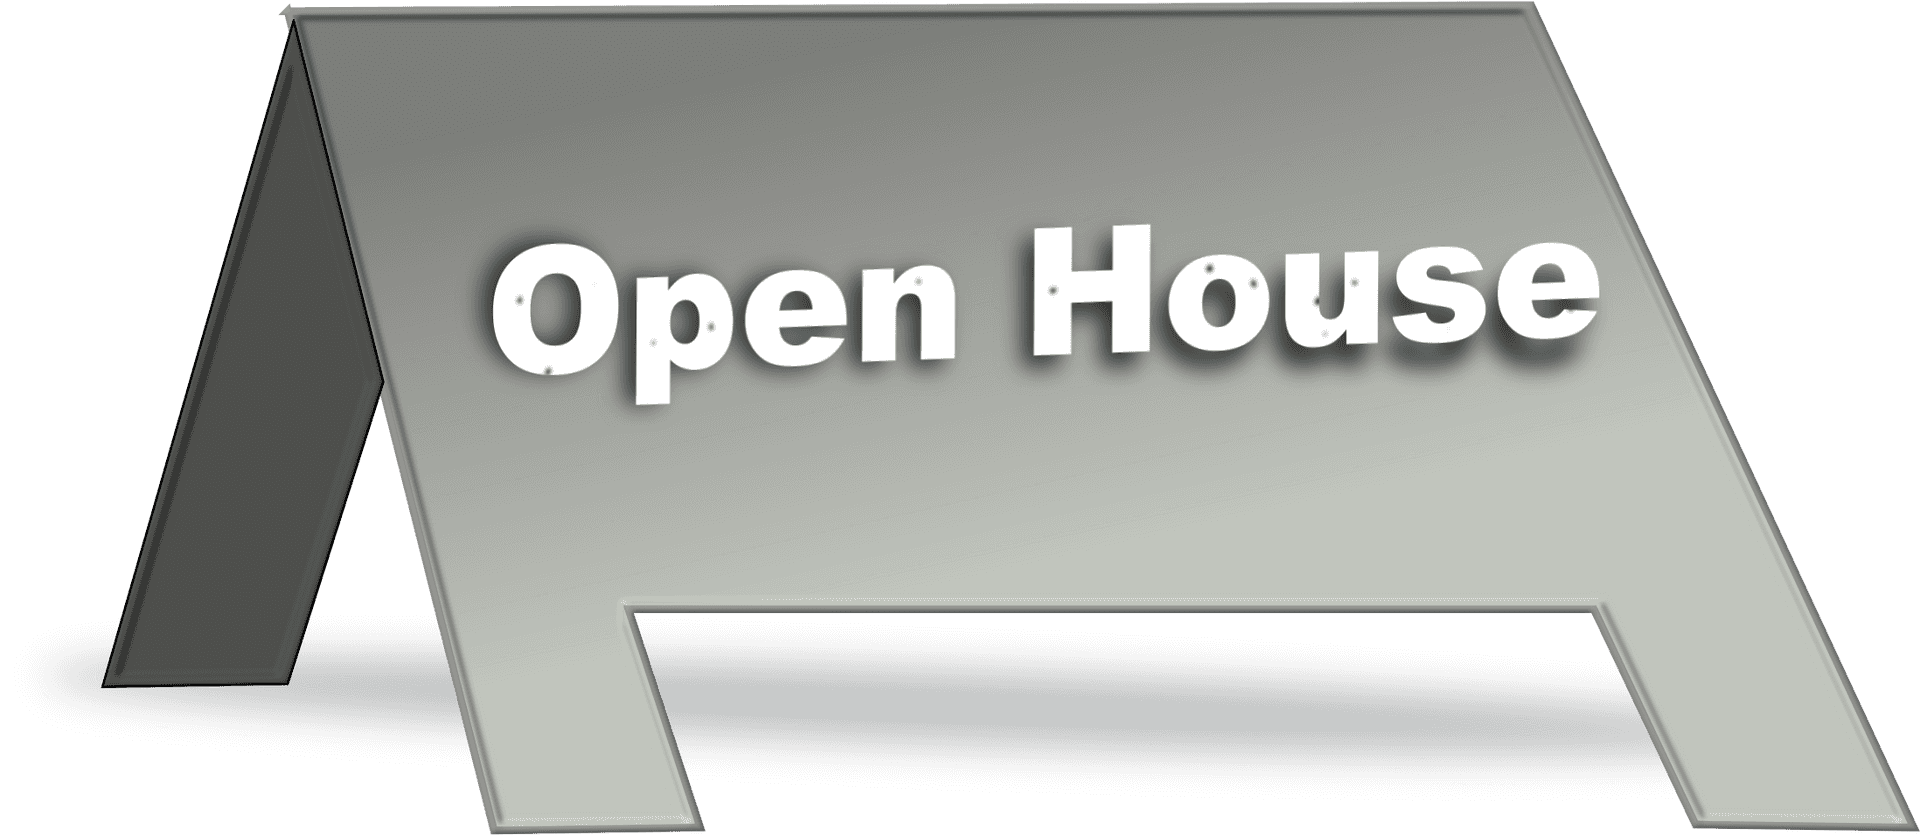 Open House Signboard PNG